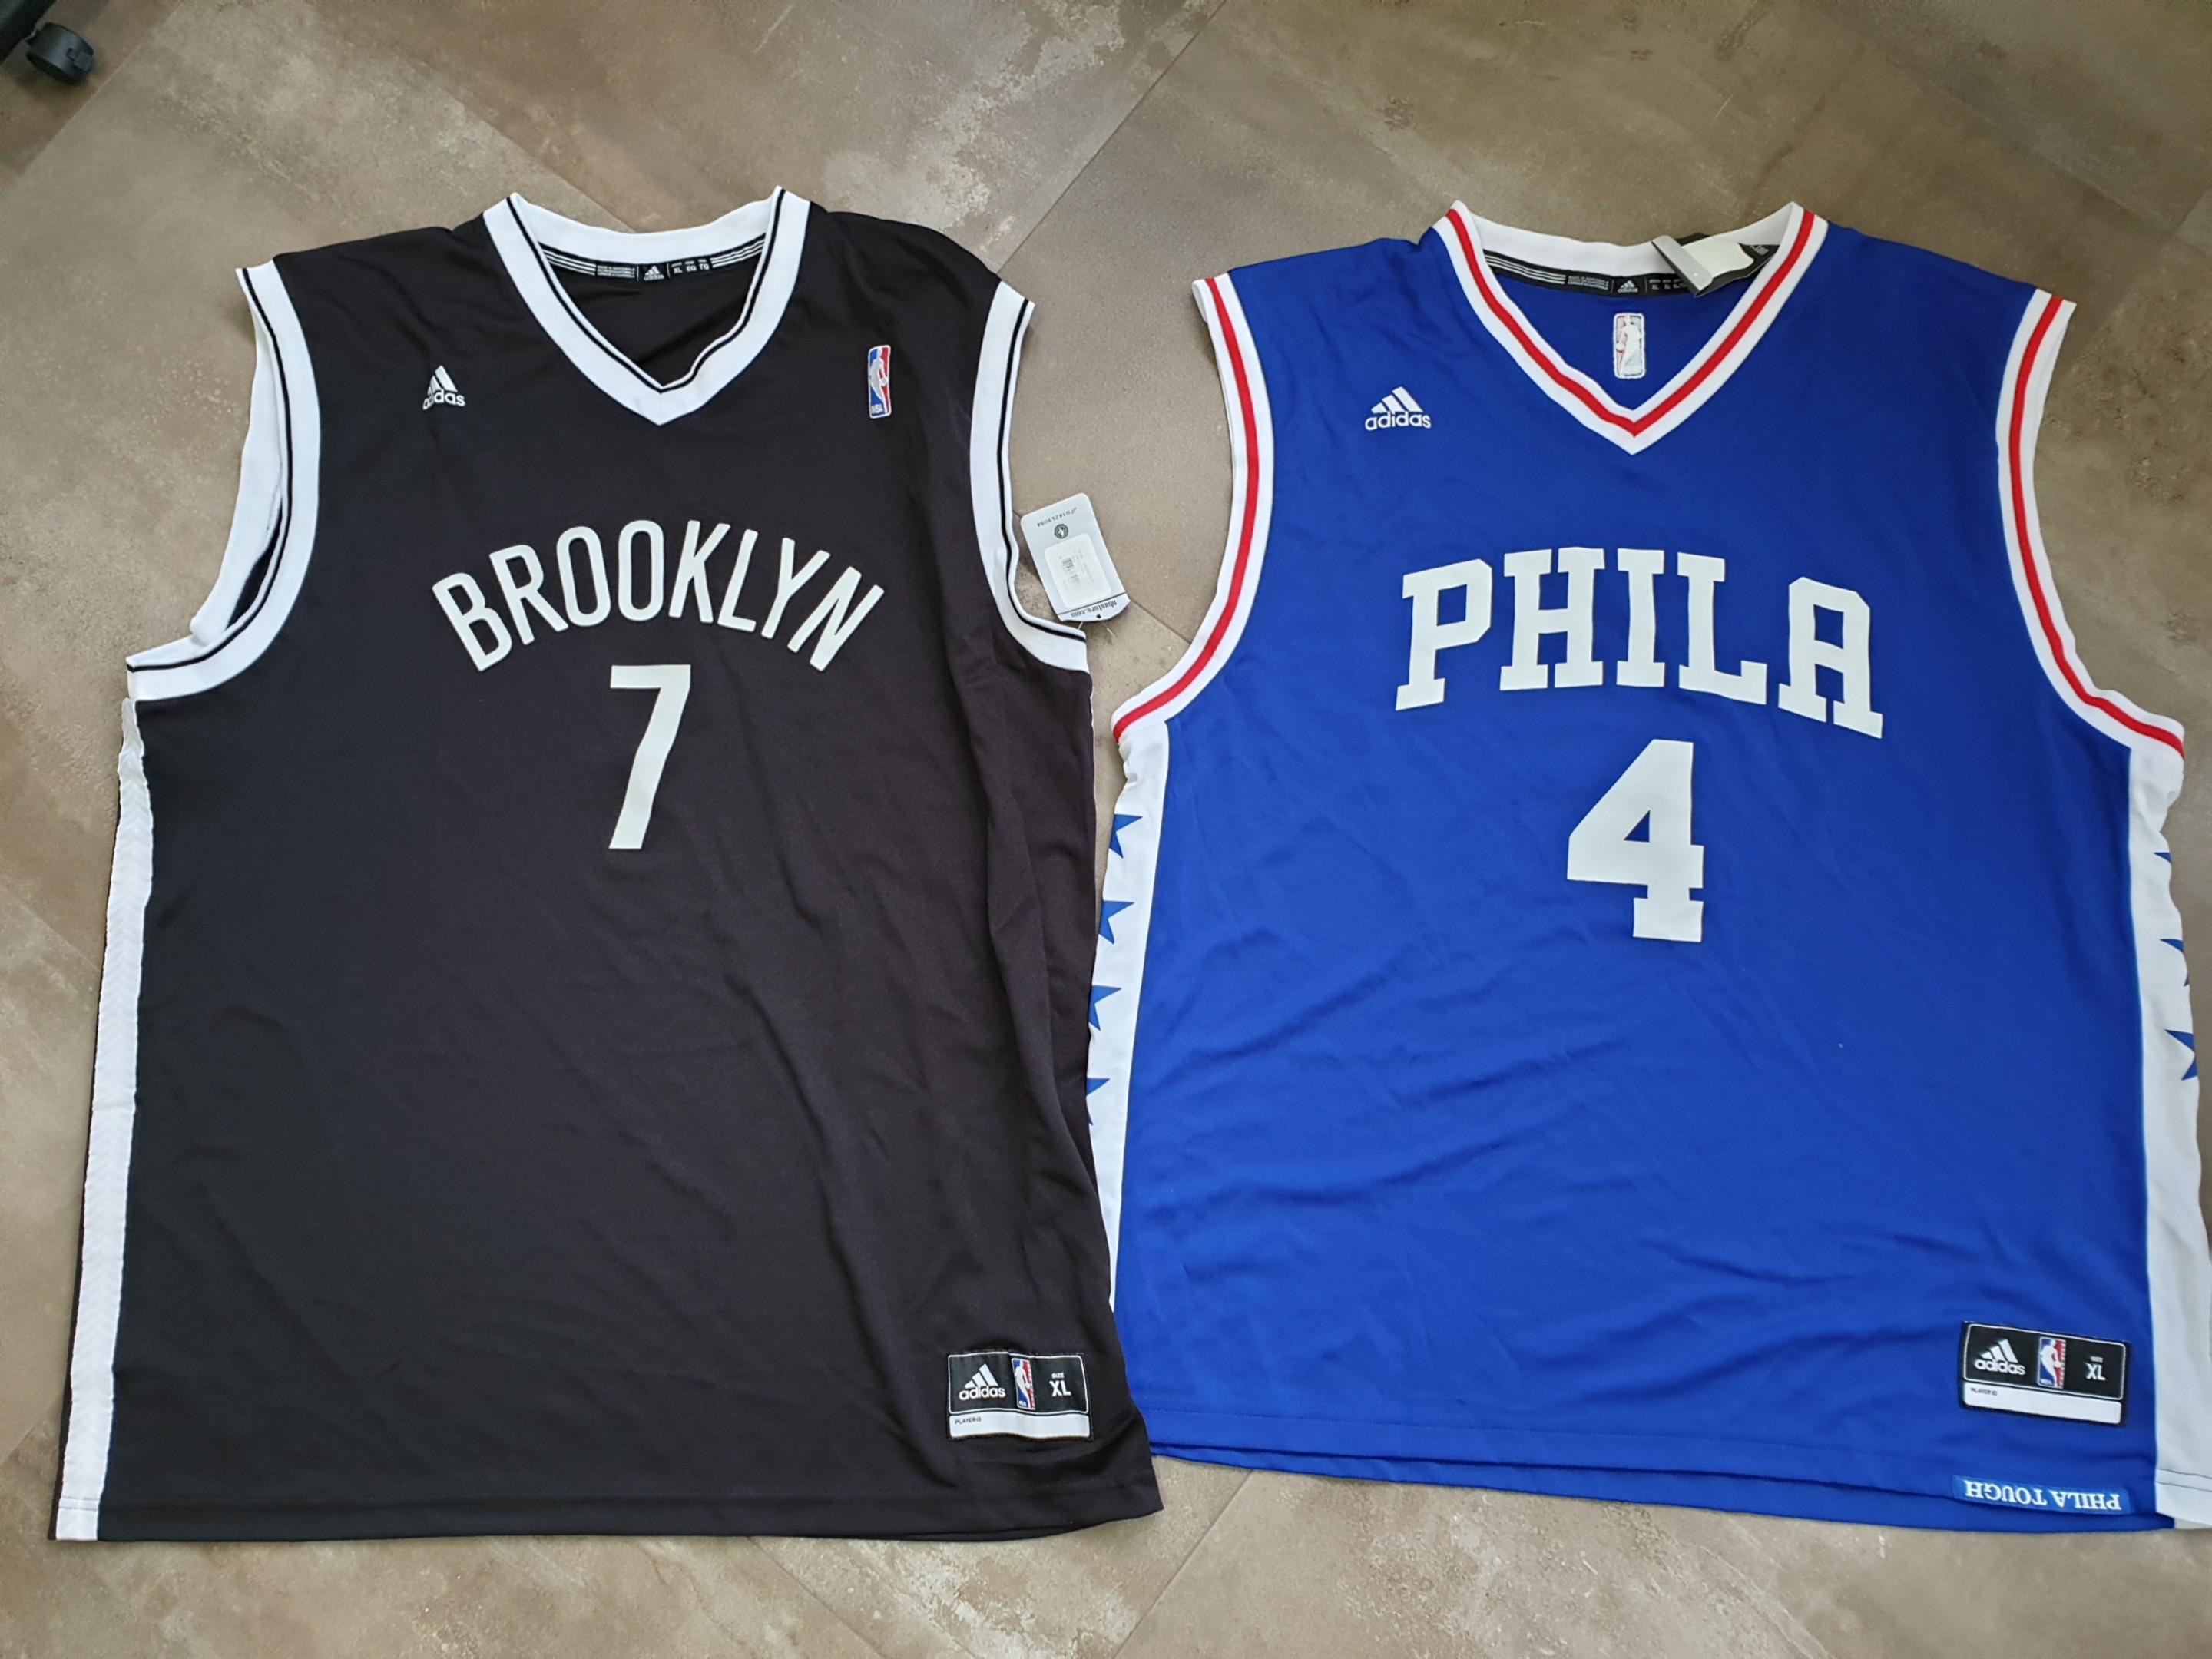 Authentic NBA Jersey xxl size for sale 